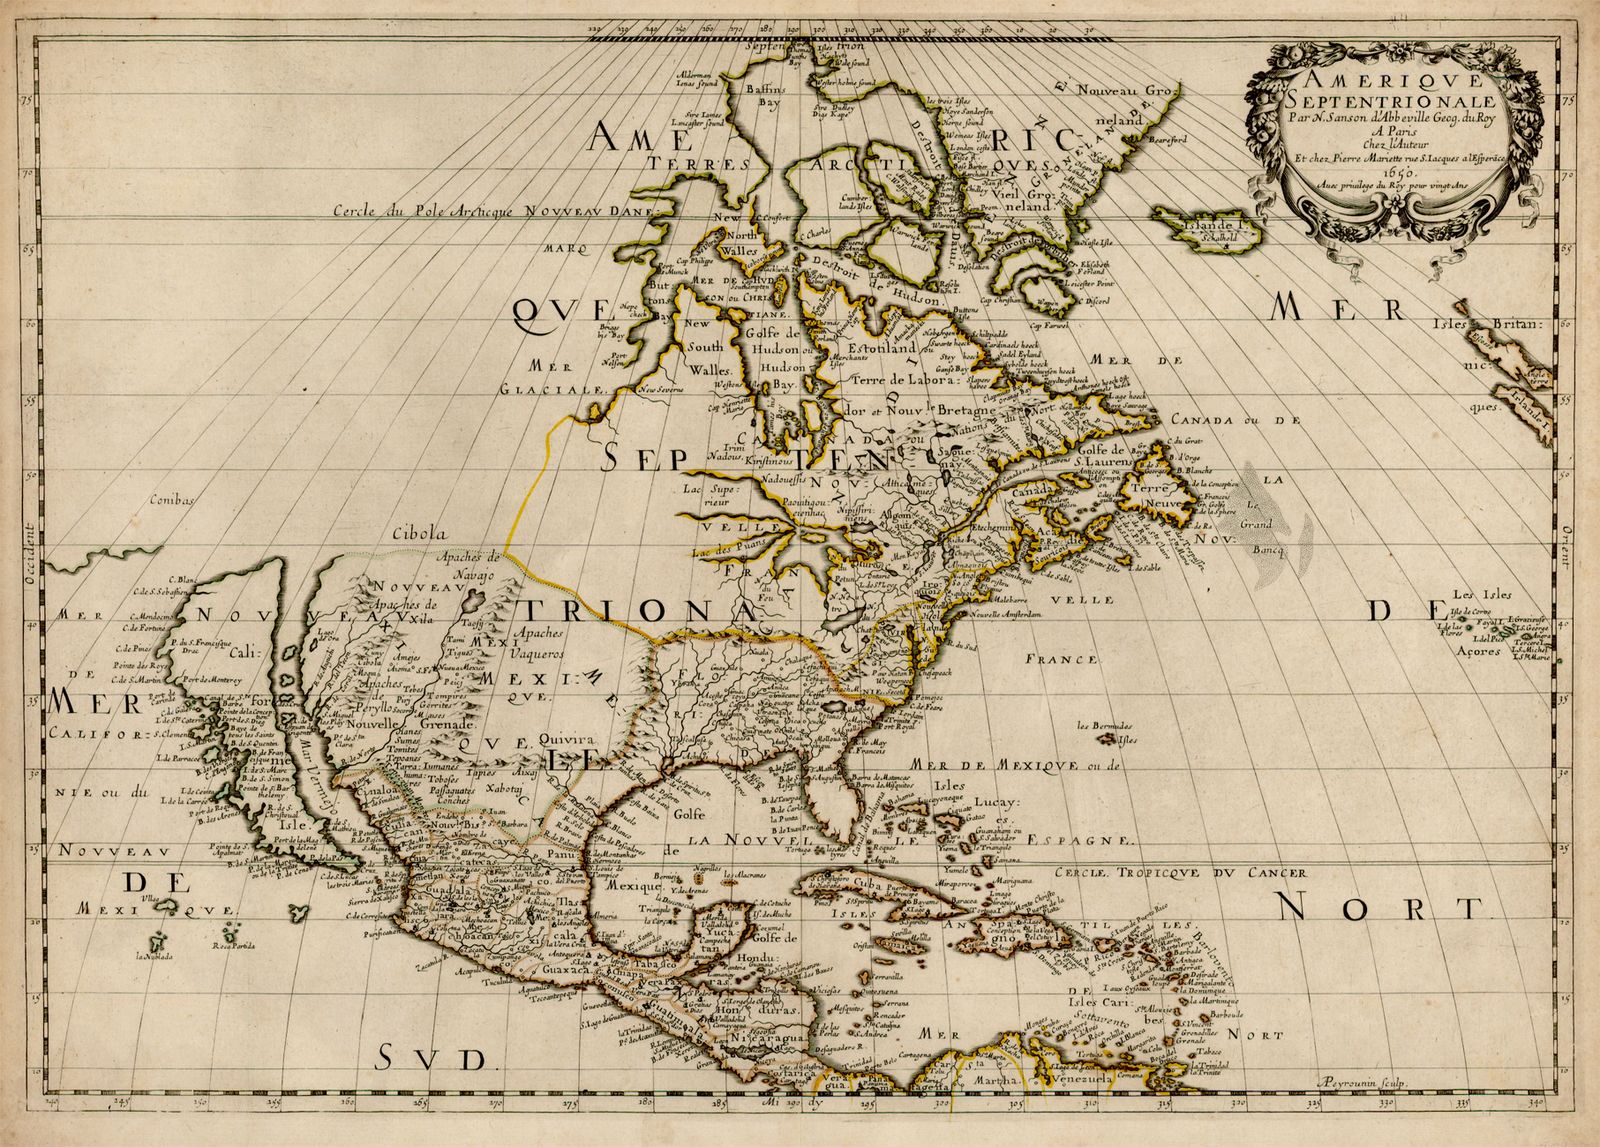 Much of New France's "Pays d'en Haut" (Upper Country) remained unexplored in the mid-1600s; Nicolas Sanson d'Abbbeville's 1650 map was the first to show all five Great Lakes